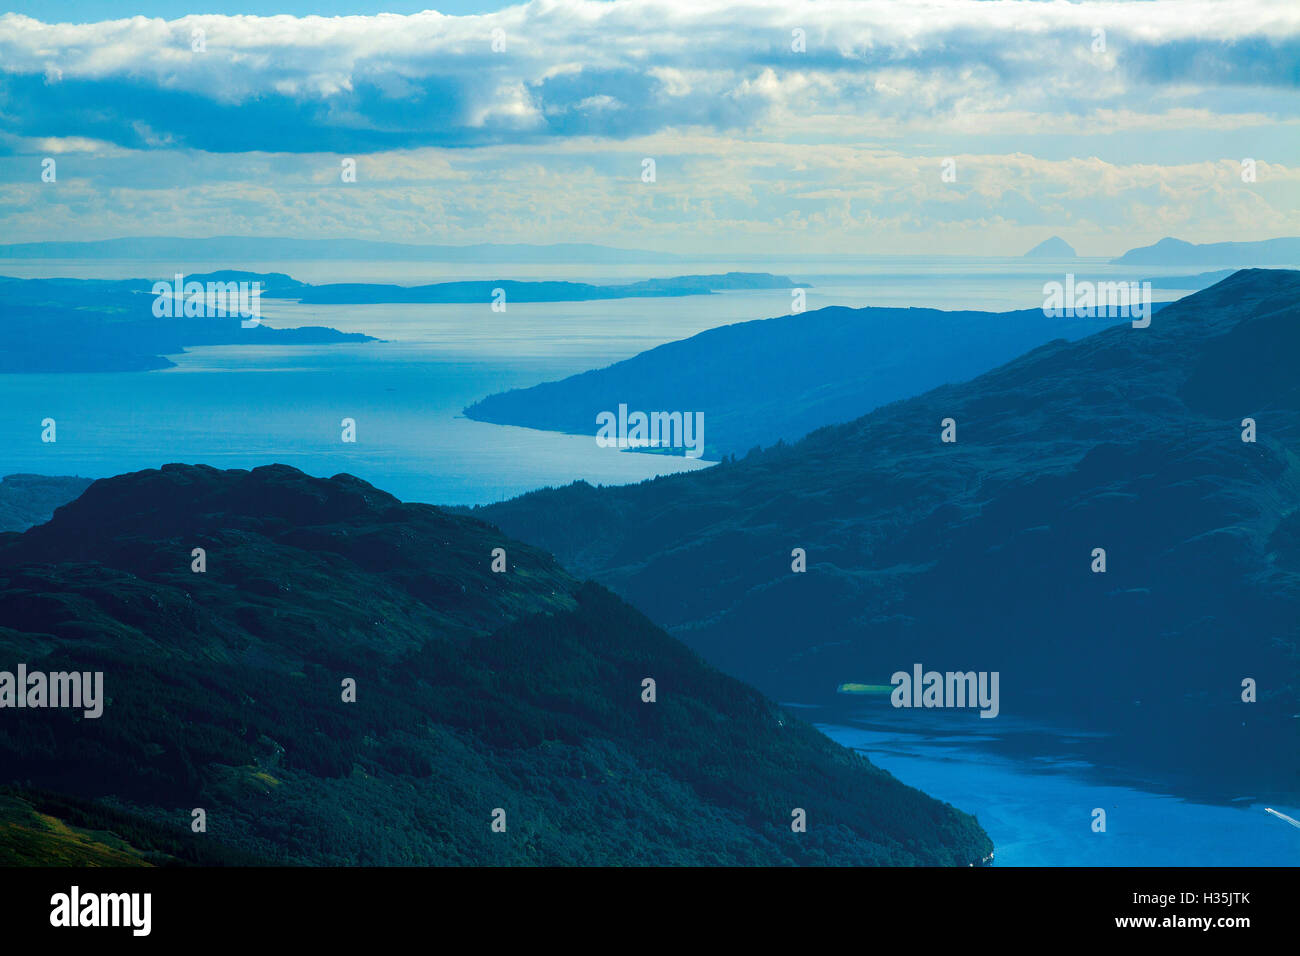 Loch Goil, Firth of Clyde, Cumbrae and Ailsa Craig from Ben Donich, Arrochar Alps, Loch Lomond and the Trossachs National Park Stock Photo